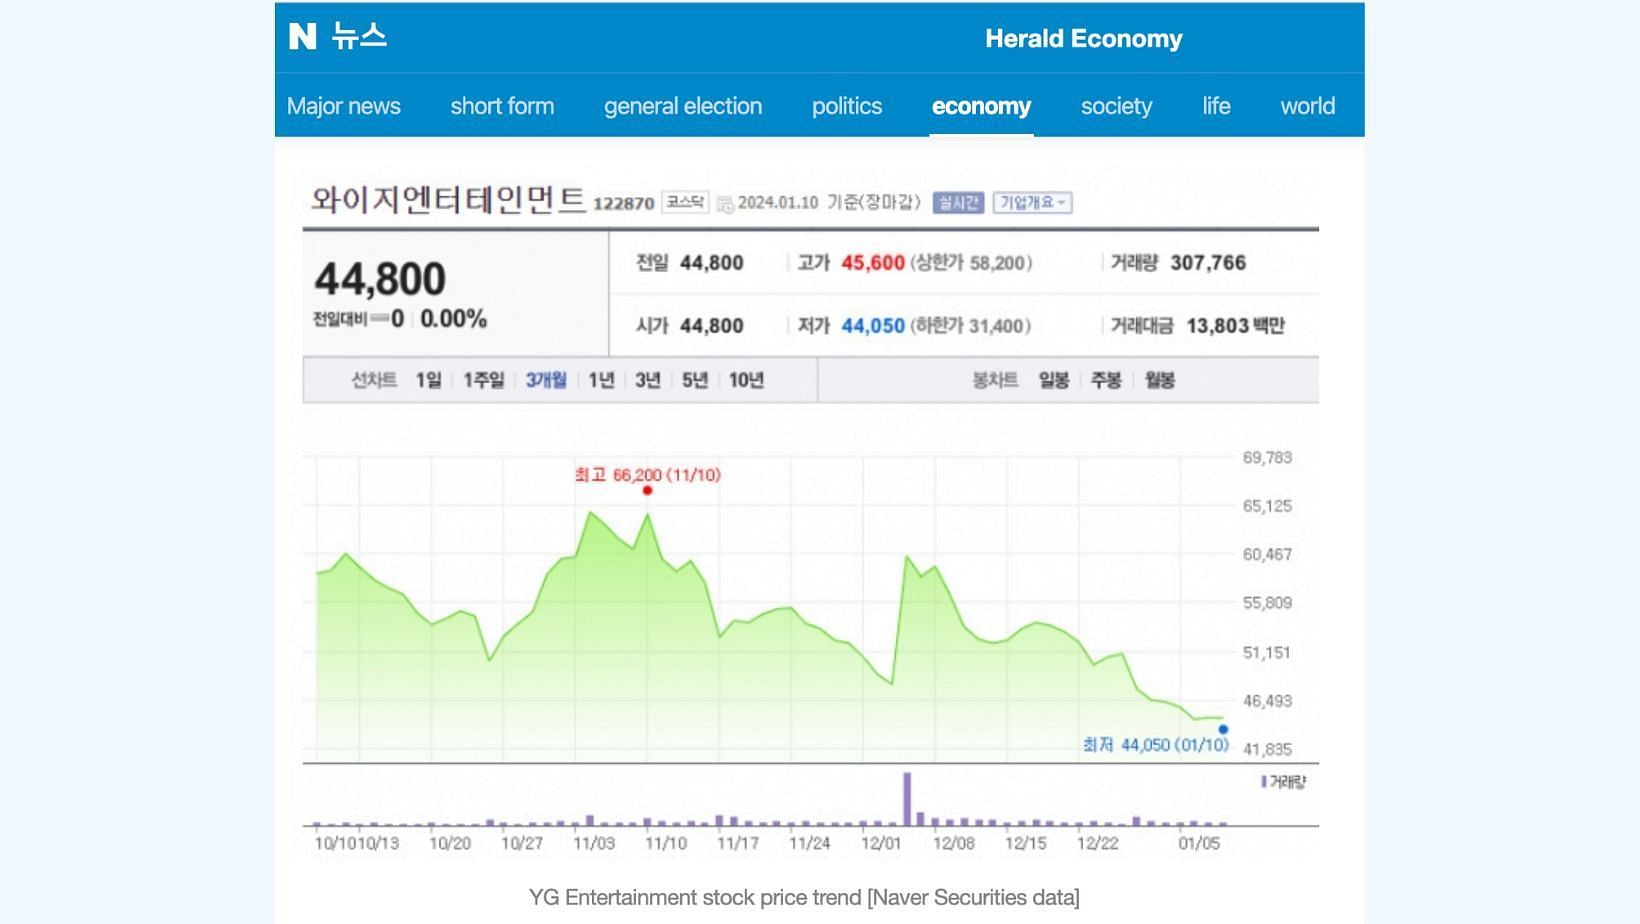 YG Entertainment stock price trend. (Image source: Naver Securities data)